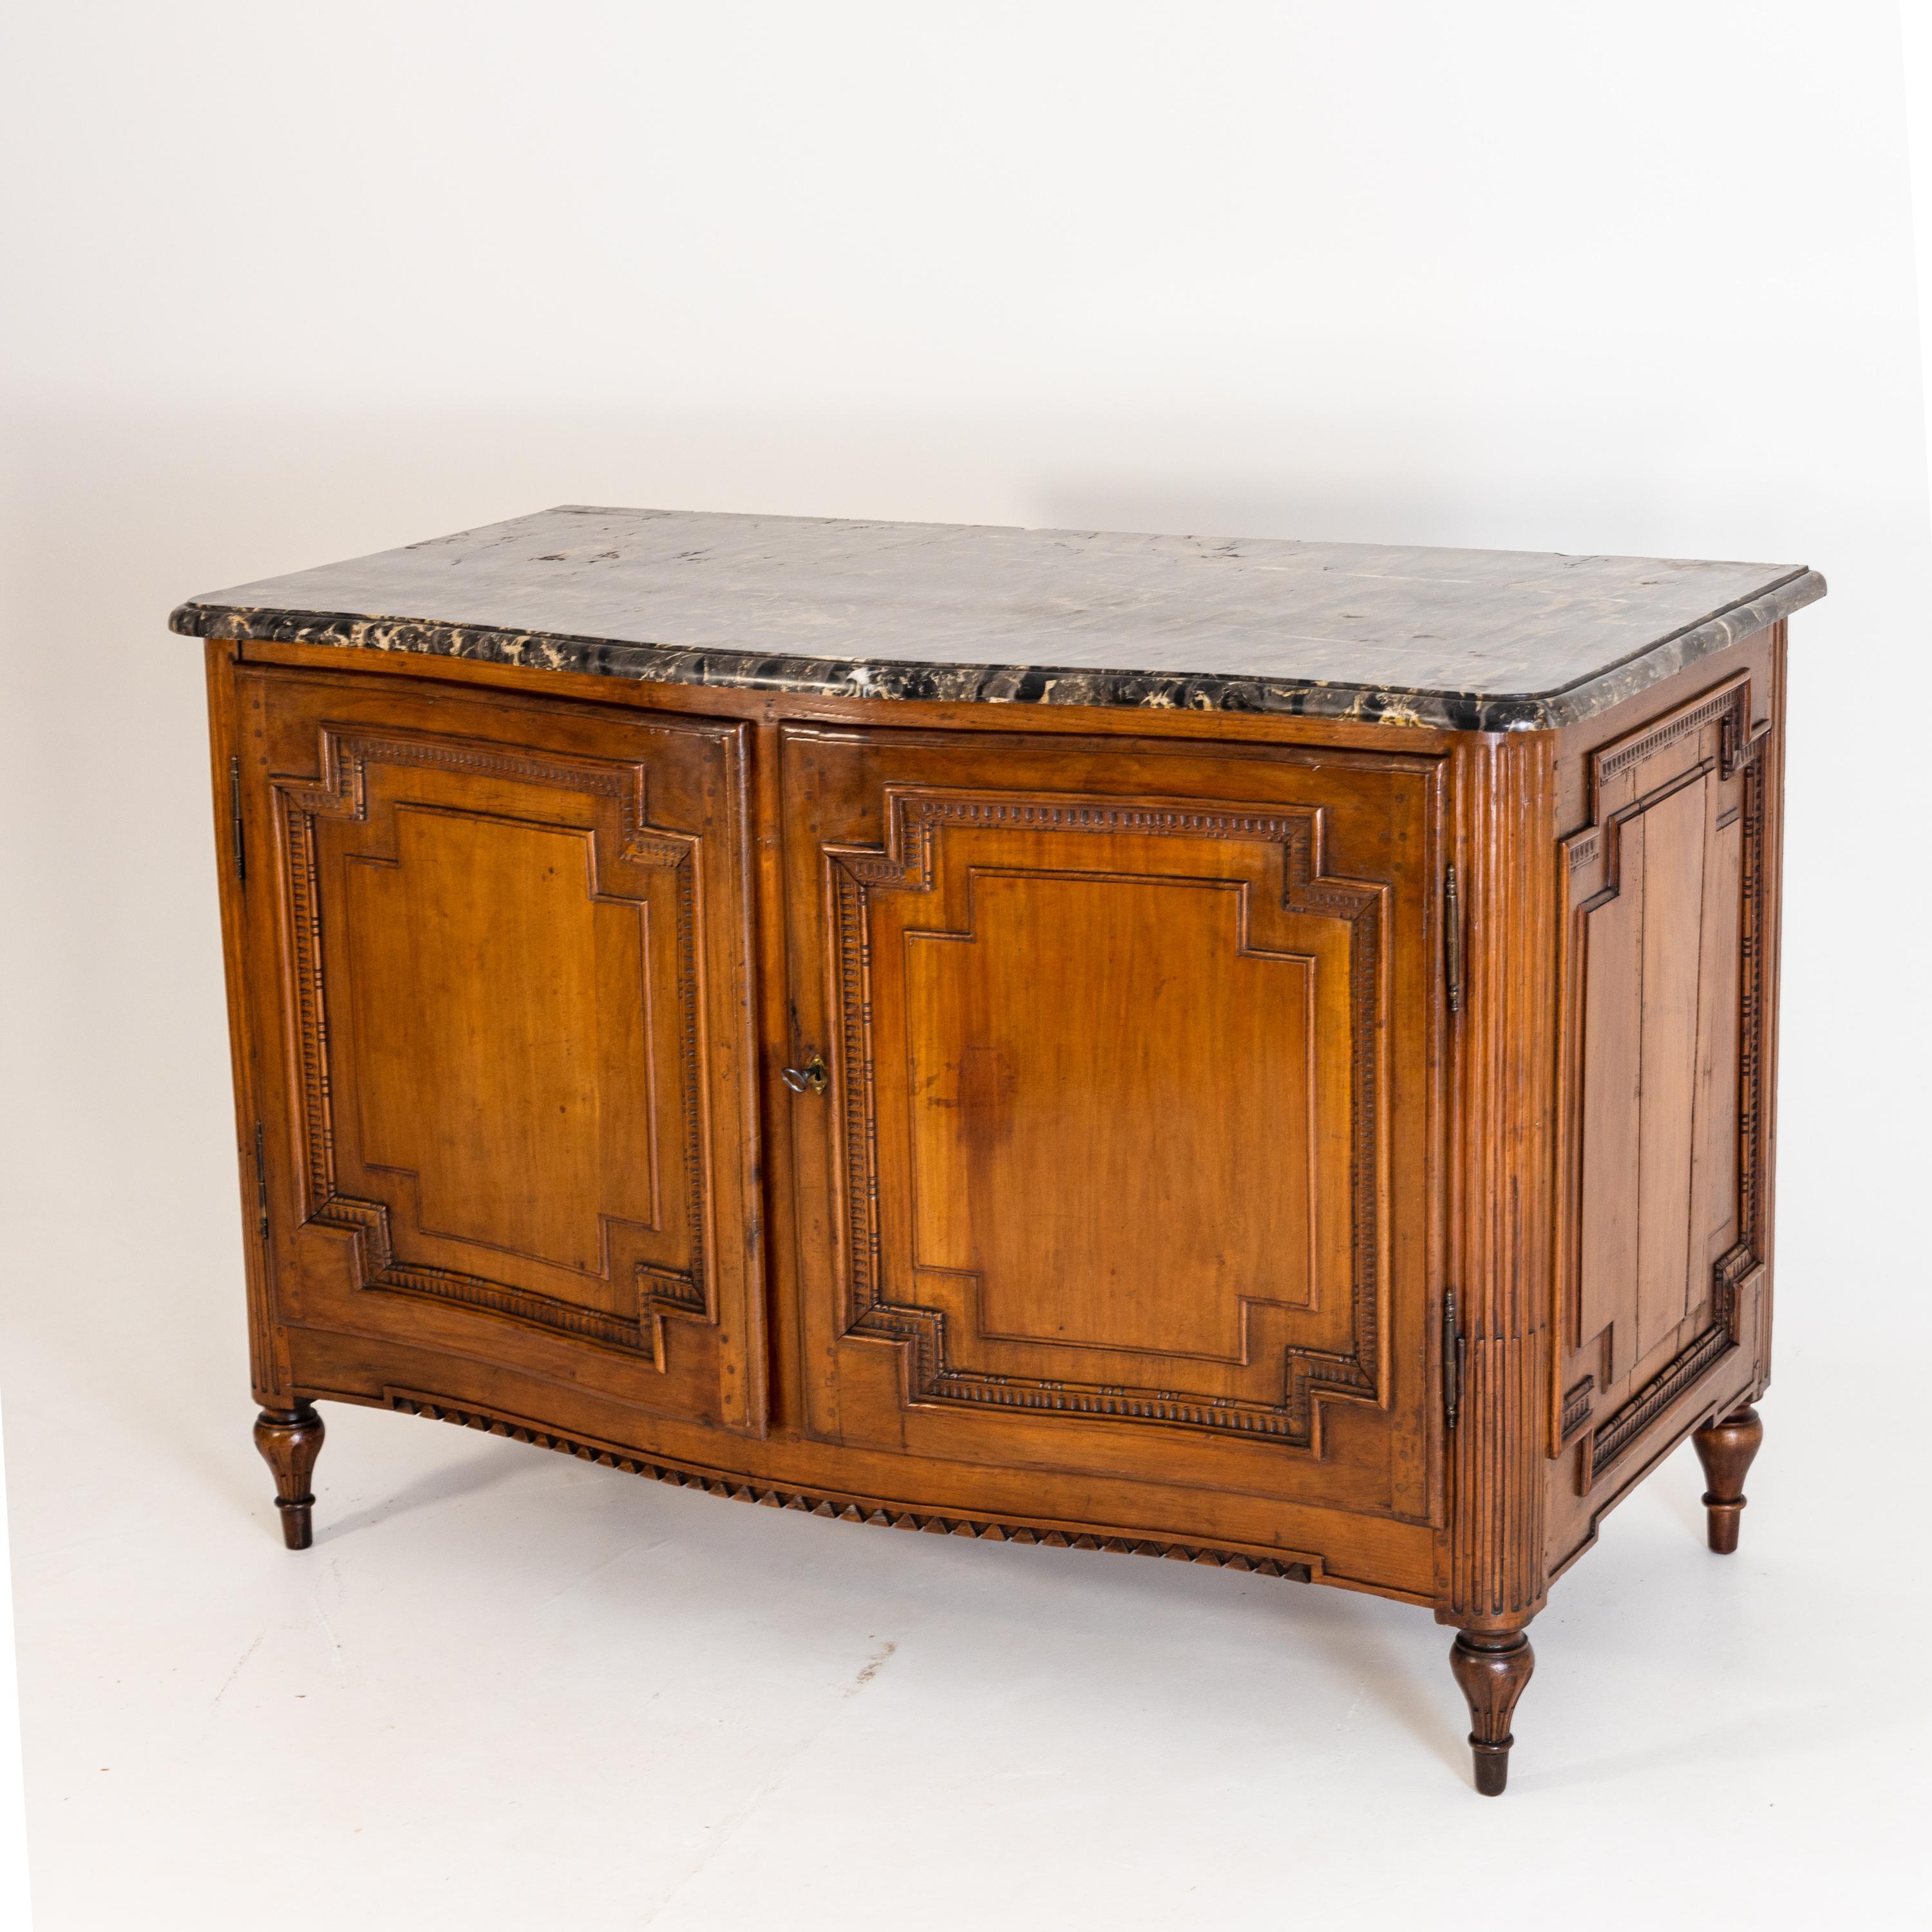 Two-door sideboard with slightly bulged front and beautiful original marble top. The body is coffered on all sides.